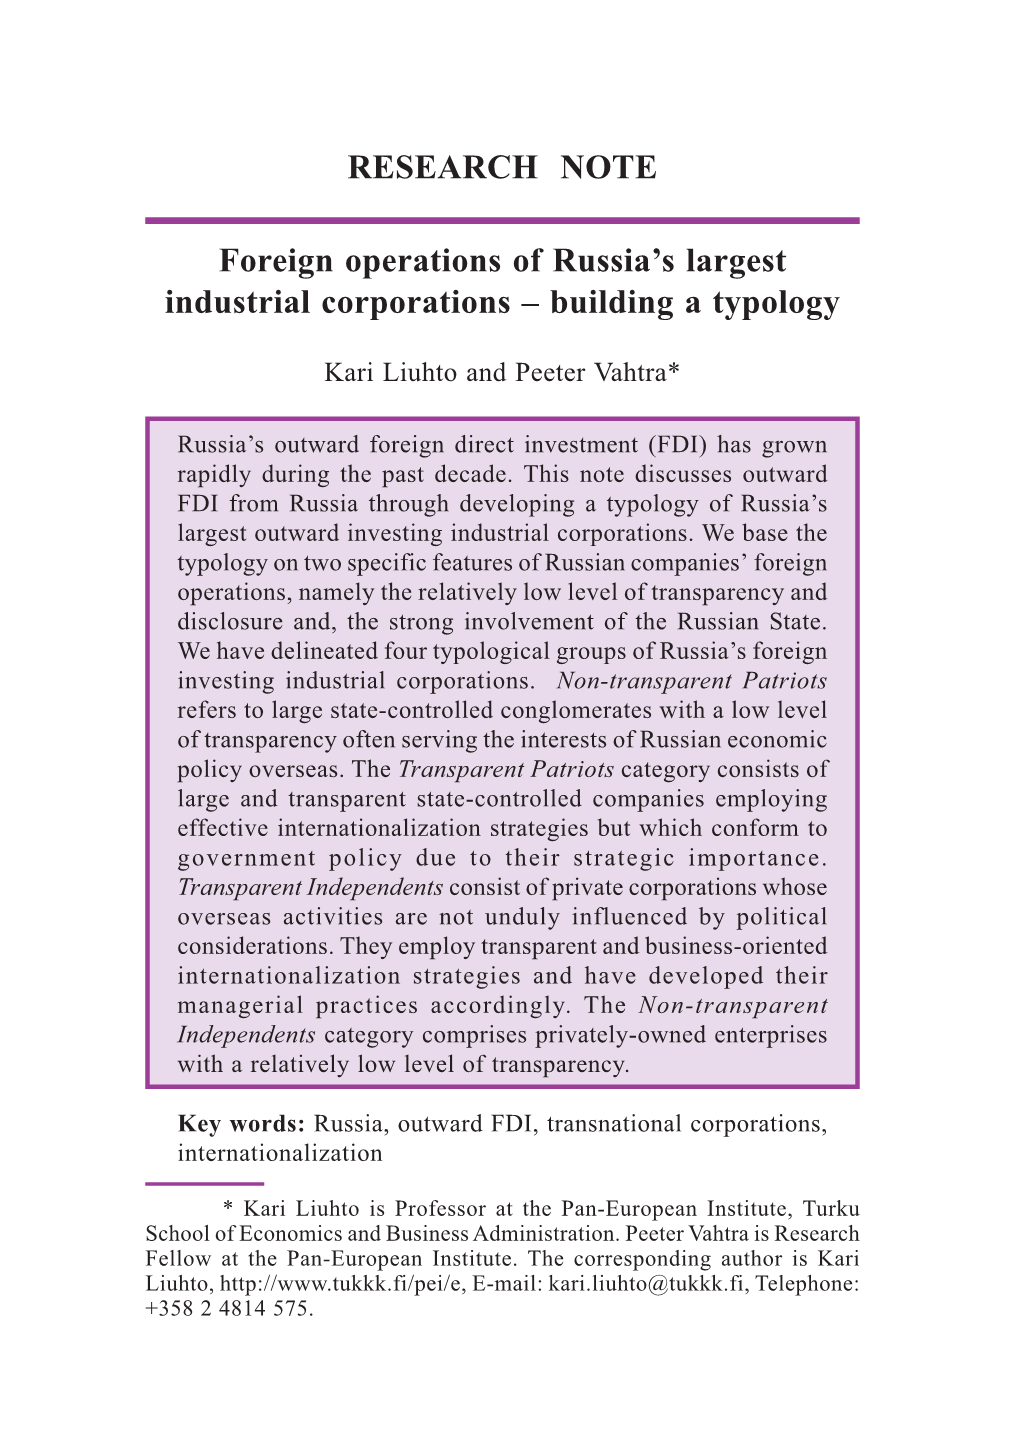 RESEARCH NOTE Foreign Operations of Russia's Largest